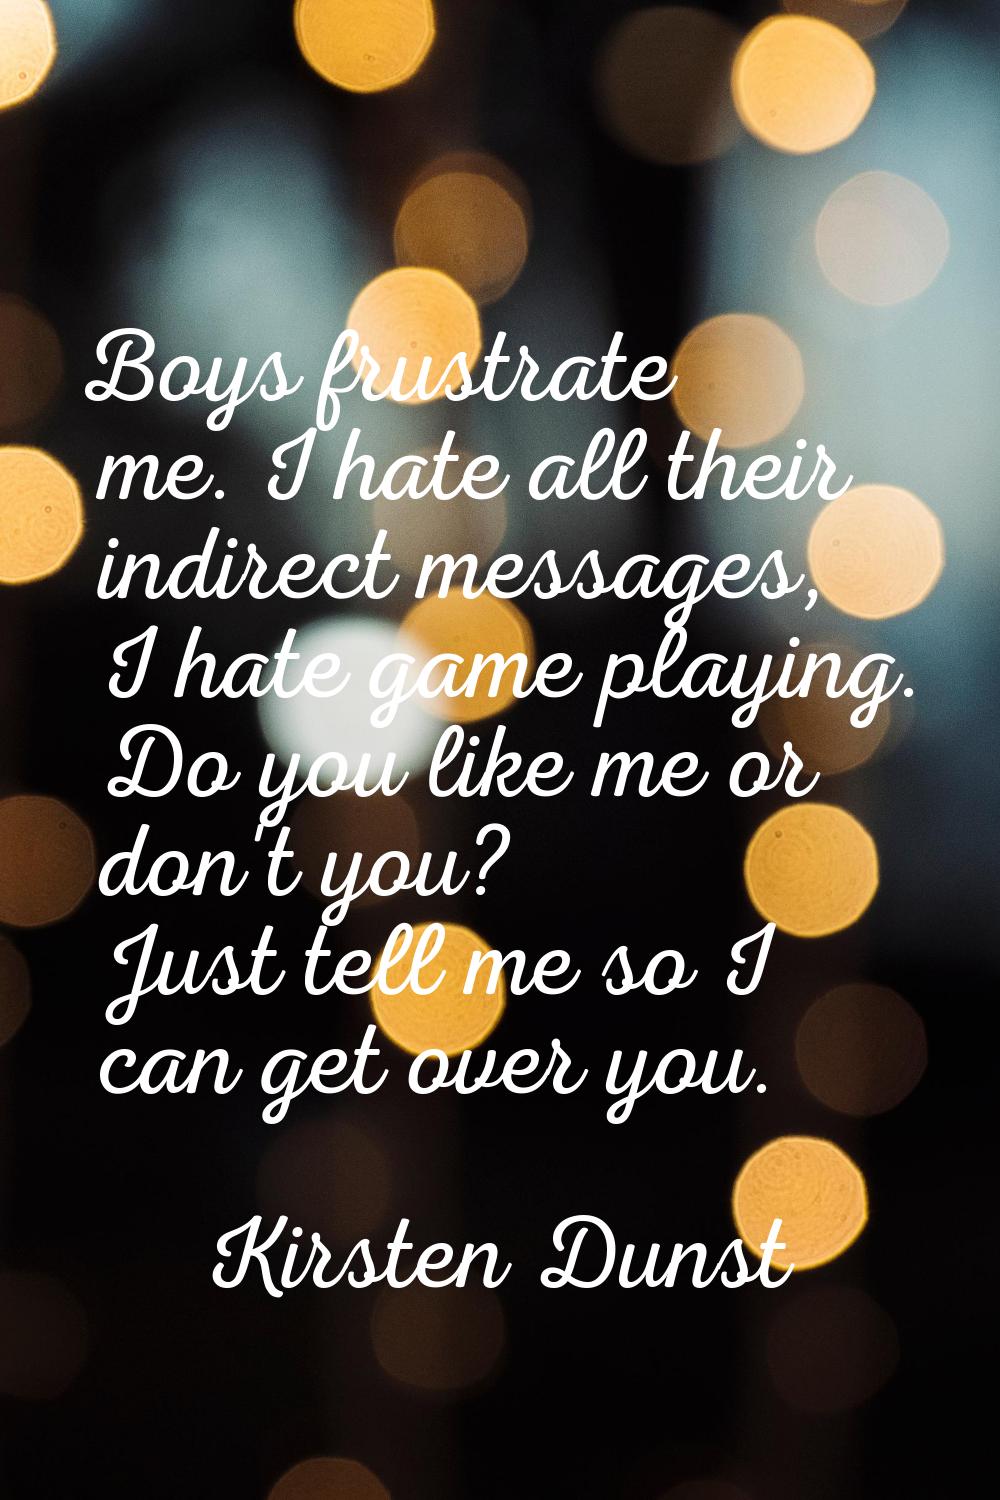 Boys frustrate me. I hate all their indirect messages, I hate game playing. Do you like me or don't